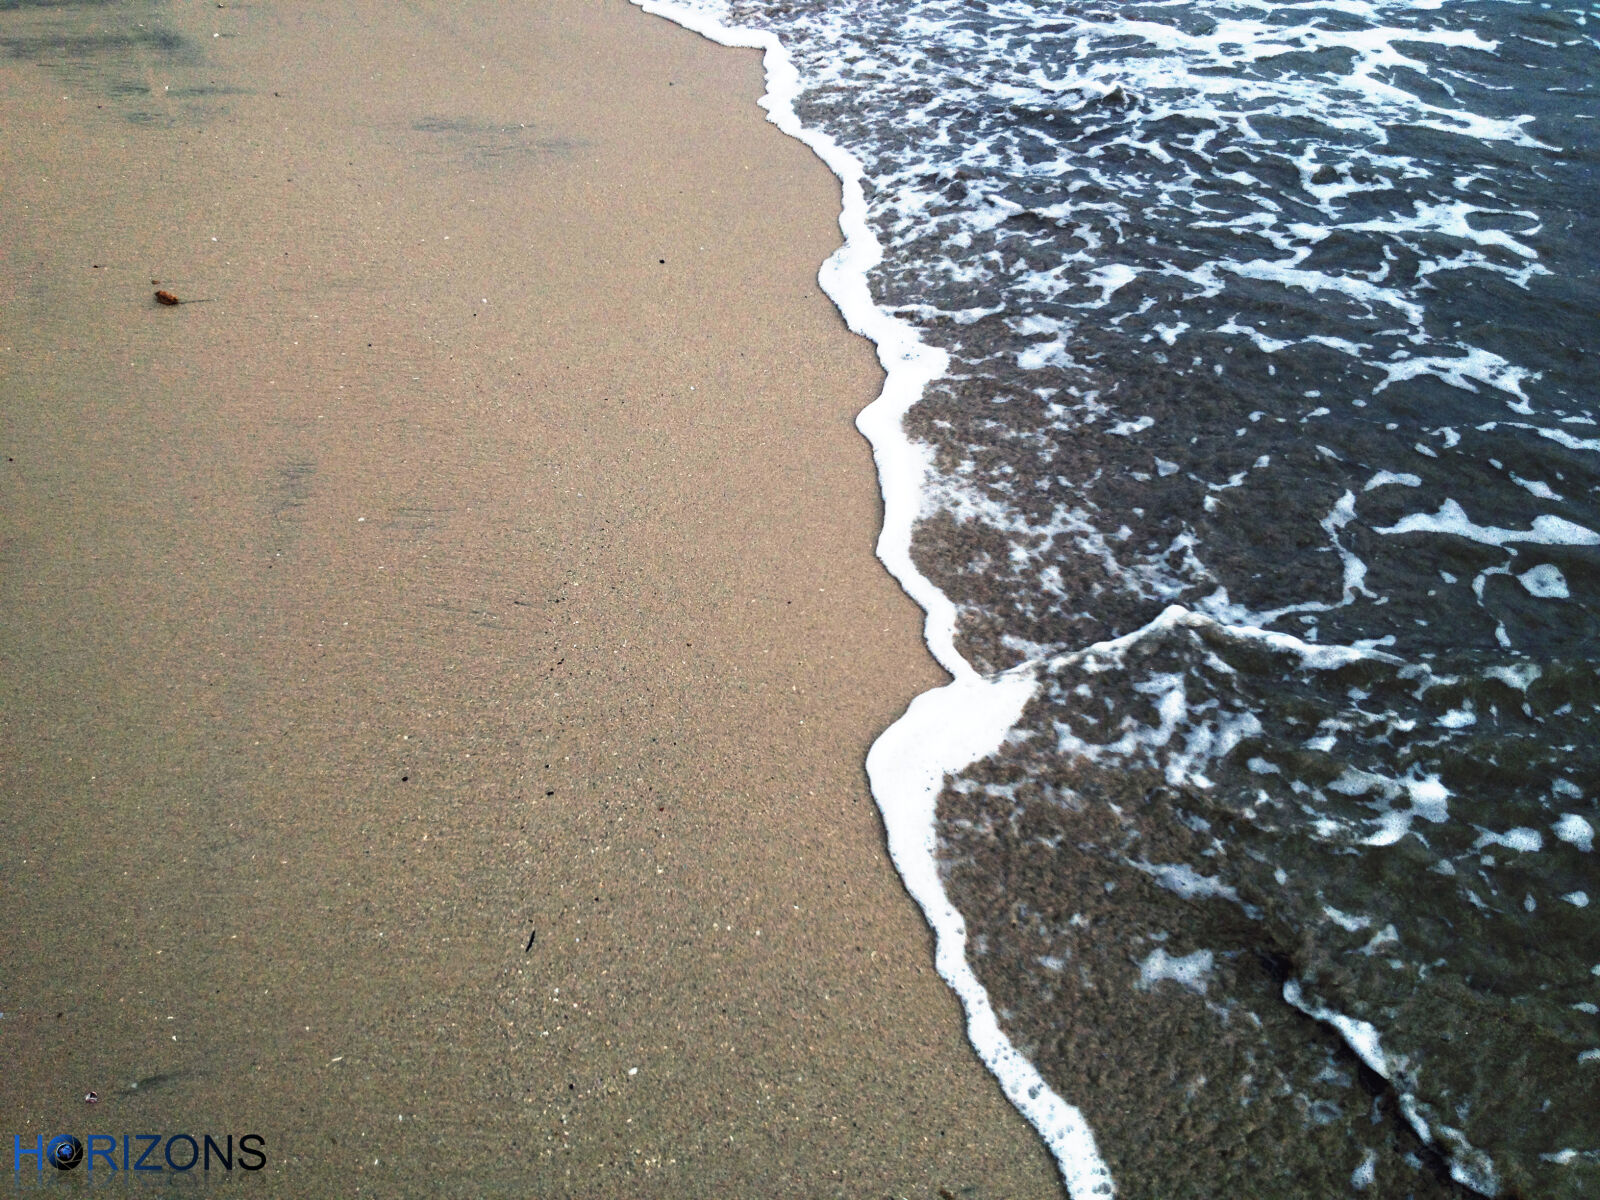 Apple iPhone 4S sample photo. Beach, beautiful, colors, colors photography